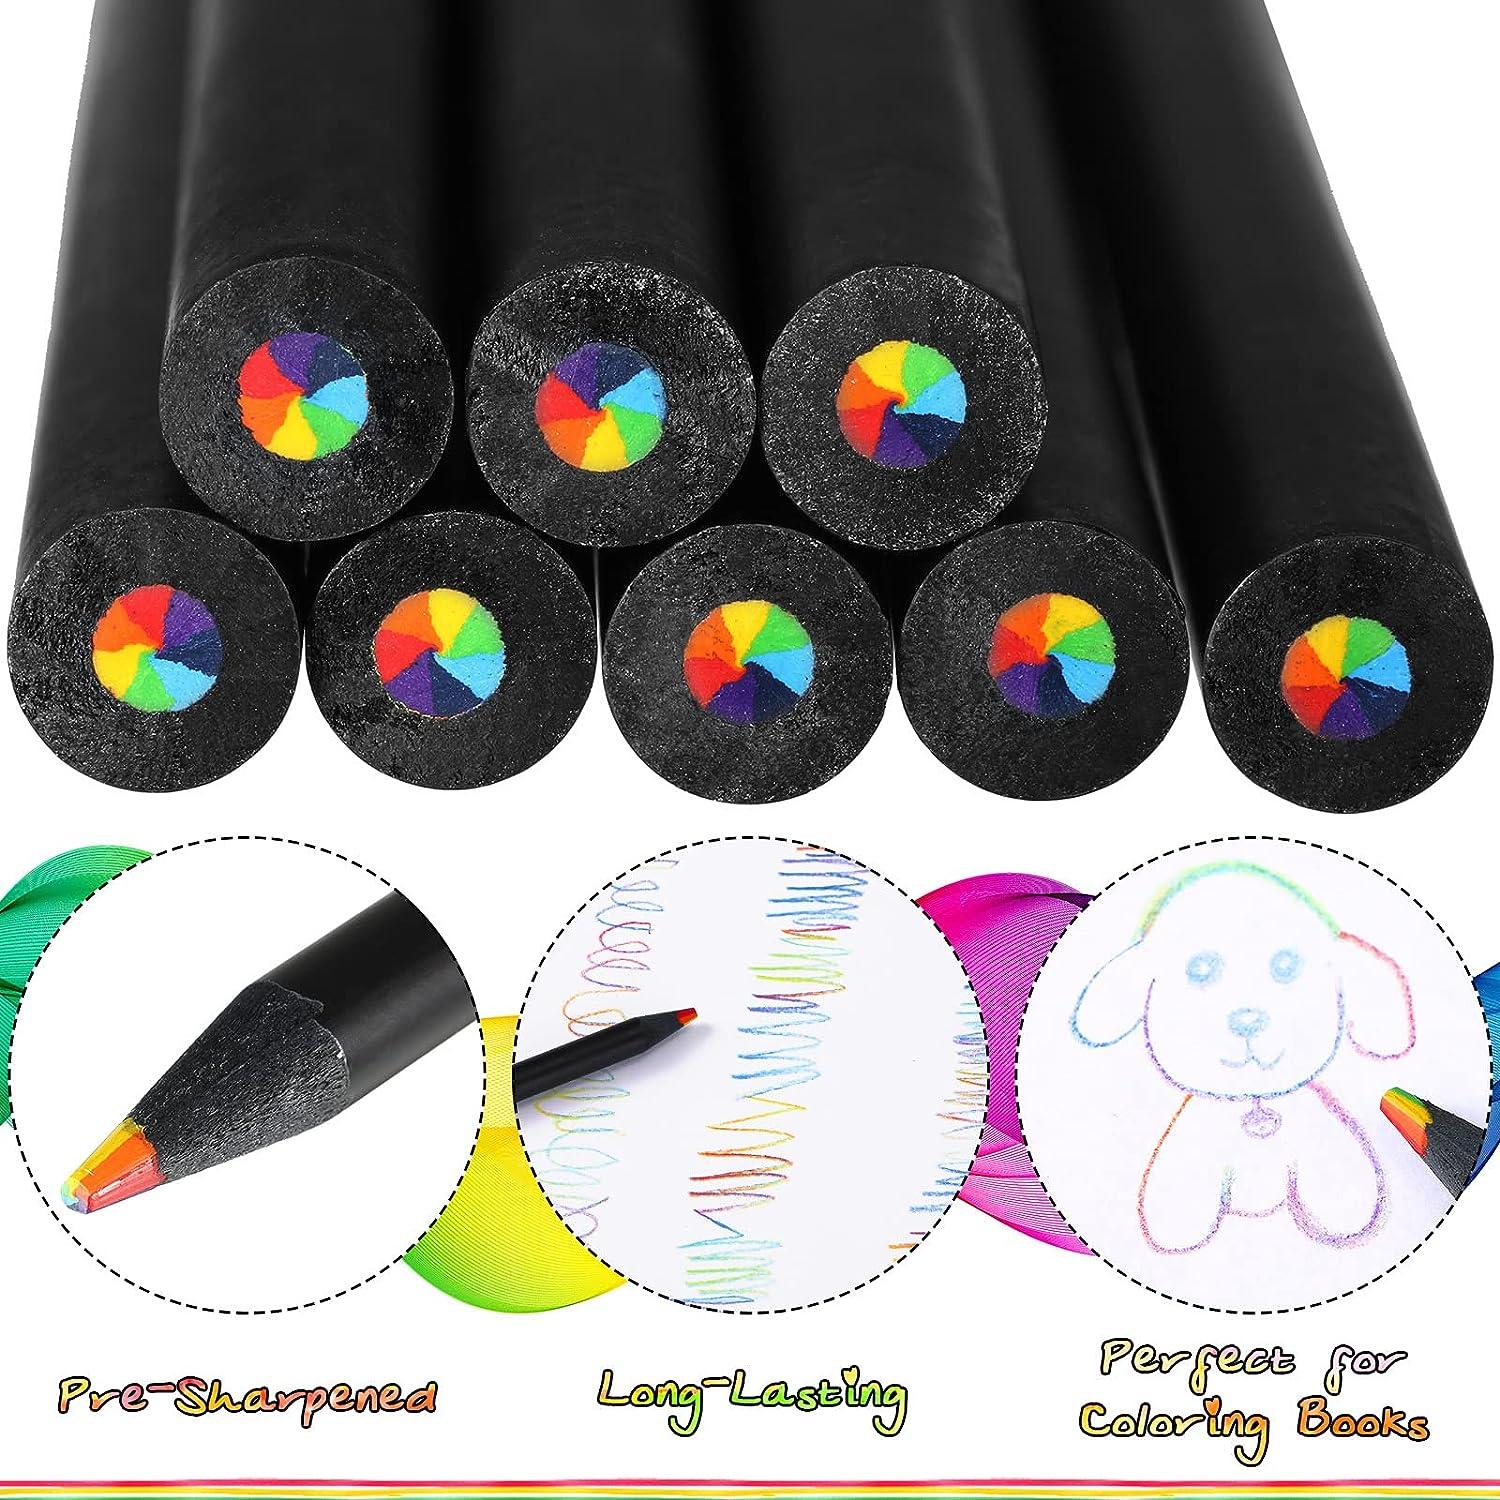 CHENGU 48 Pcs Rainbow Colored Pencils, 7 Color in 1 Rainbow Pencil for Kids,  Wooden Colored Pencil Multi Colored Pencils Bulk with 4 Pieces Sharpener  for Kids Adults Art Drawing (Black Wood)